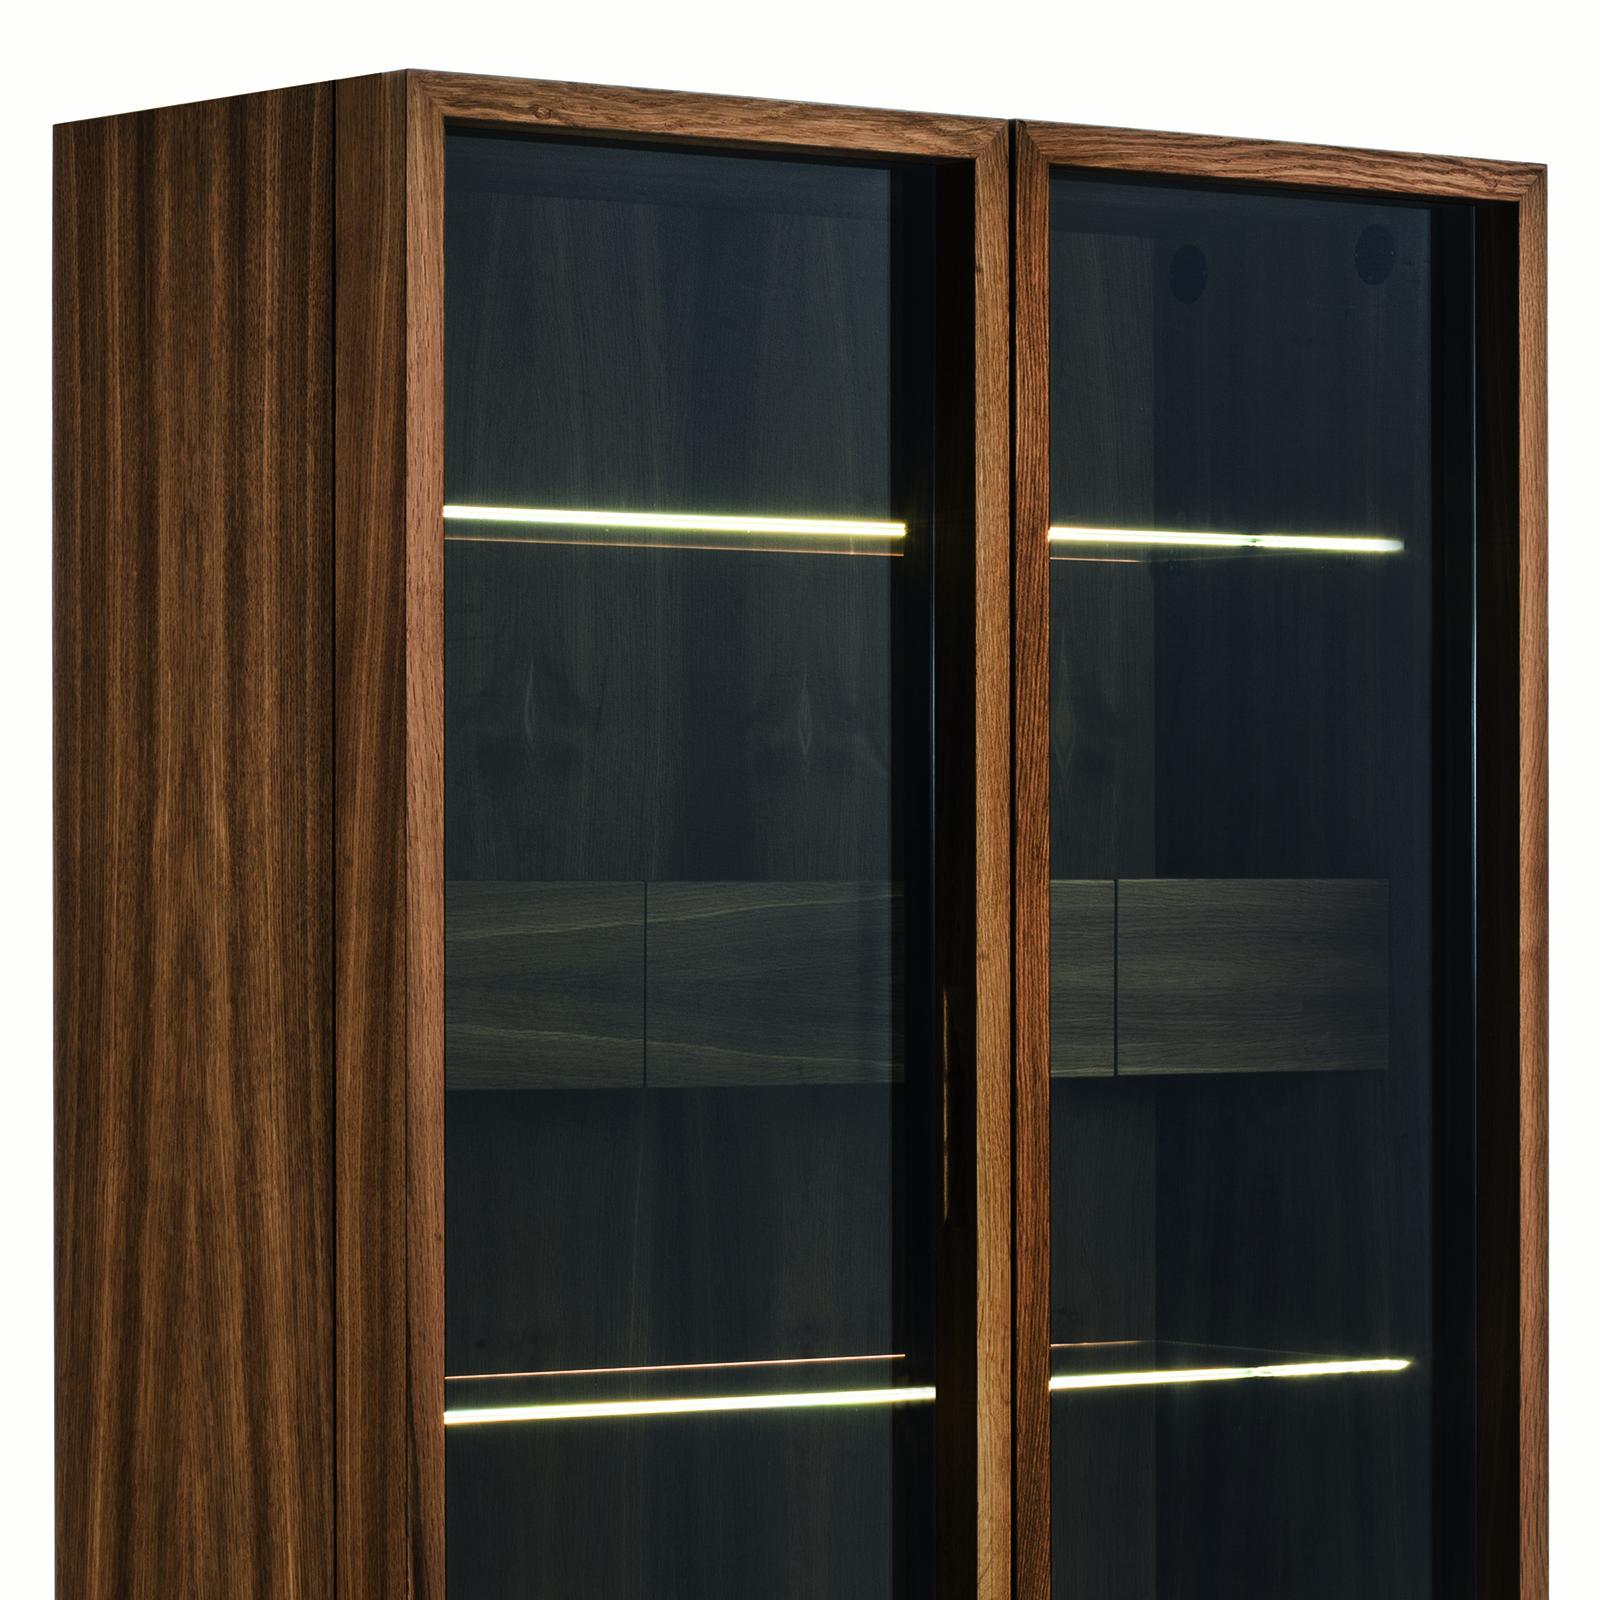 Wardrobe Celeste with all structure in solid walnut wood, with 180° openable
glass doors with a wooden frame. With iron base. Inside is lighted with LED strips 
along the inner sides which are activated automatically via touch sensors by the